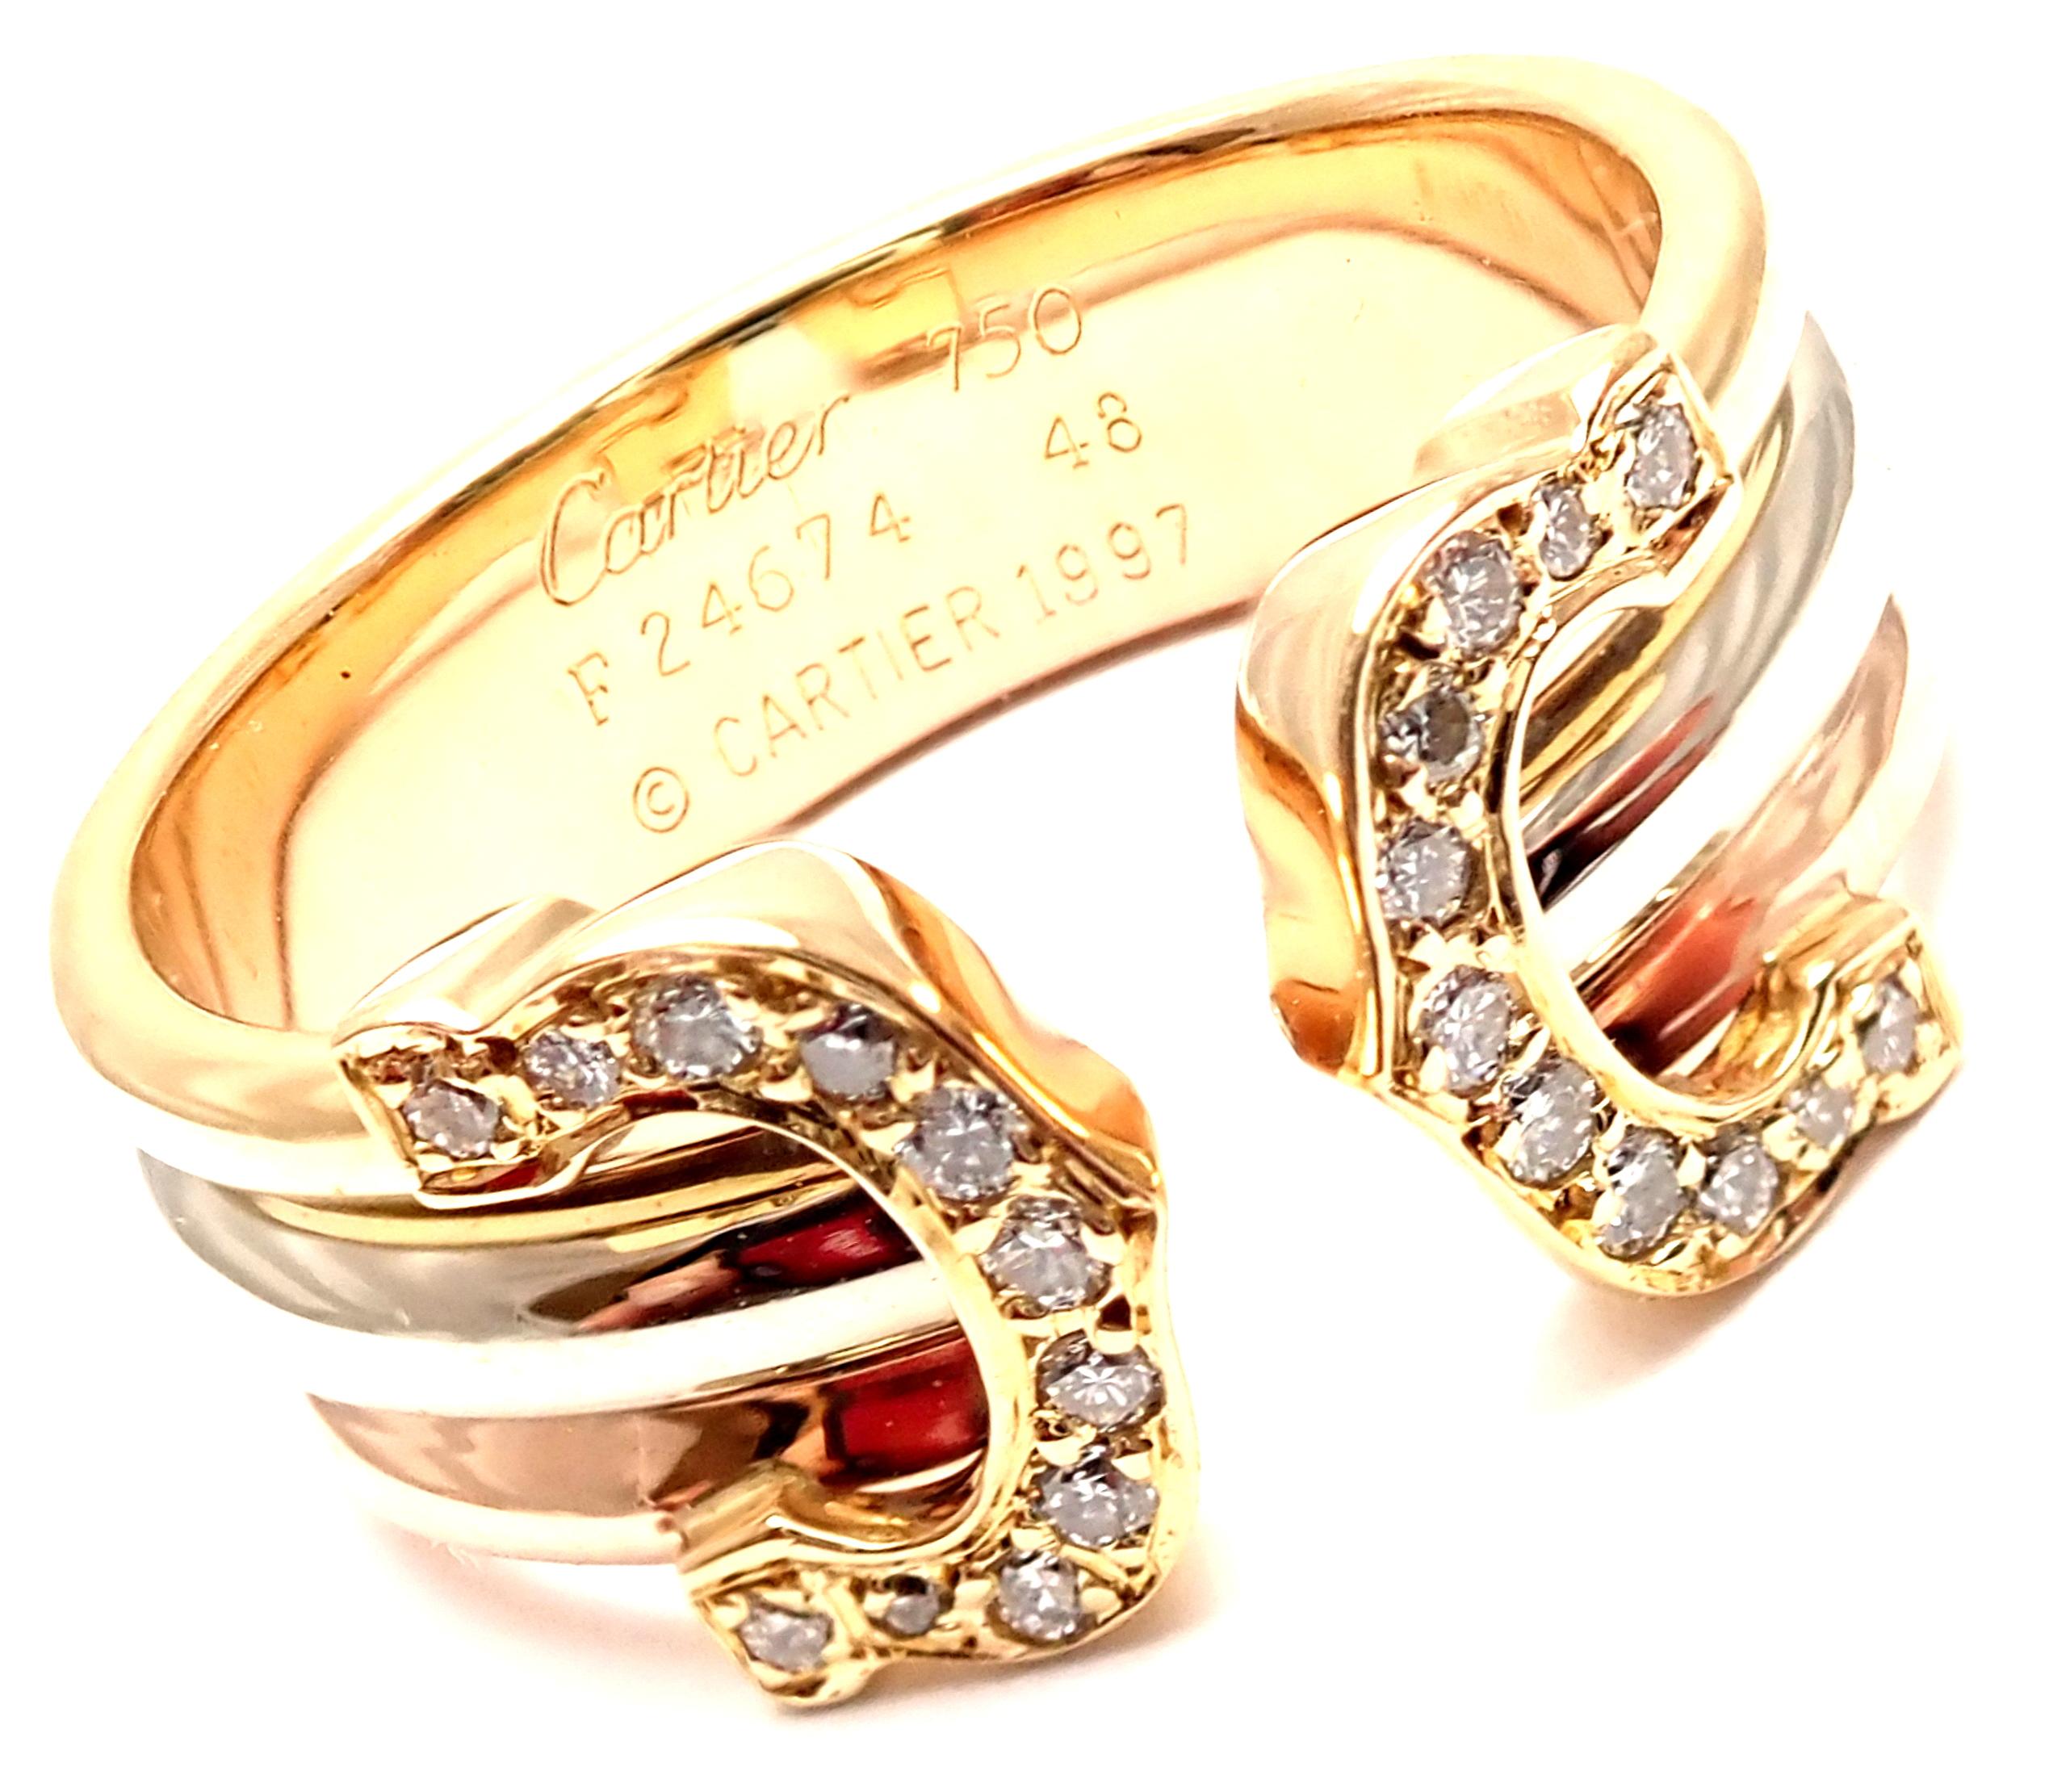 18k Tri-Color Gold (Yellow, White, Rose) Diamond Double-C Band Ring by Cartier. 
With 11 round brilliant cut diamonds VS1 clarity, G color total weight approx. .22ct
Details: 
Weight: 4.5 grams
Size: European 48, US 4.5
Width: 8mm
Stamped Hallmarks: